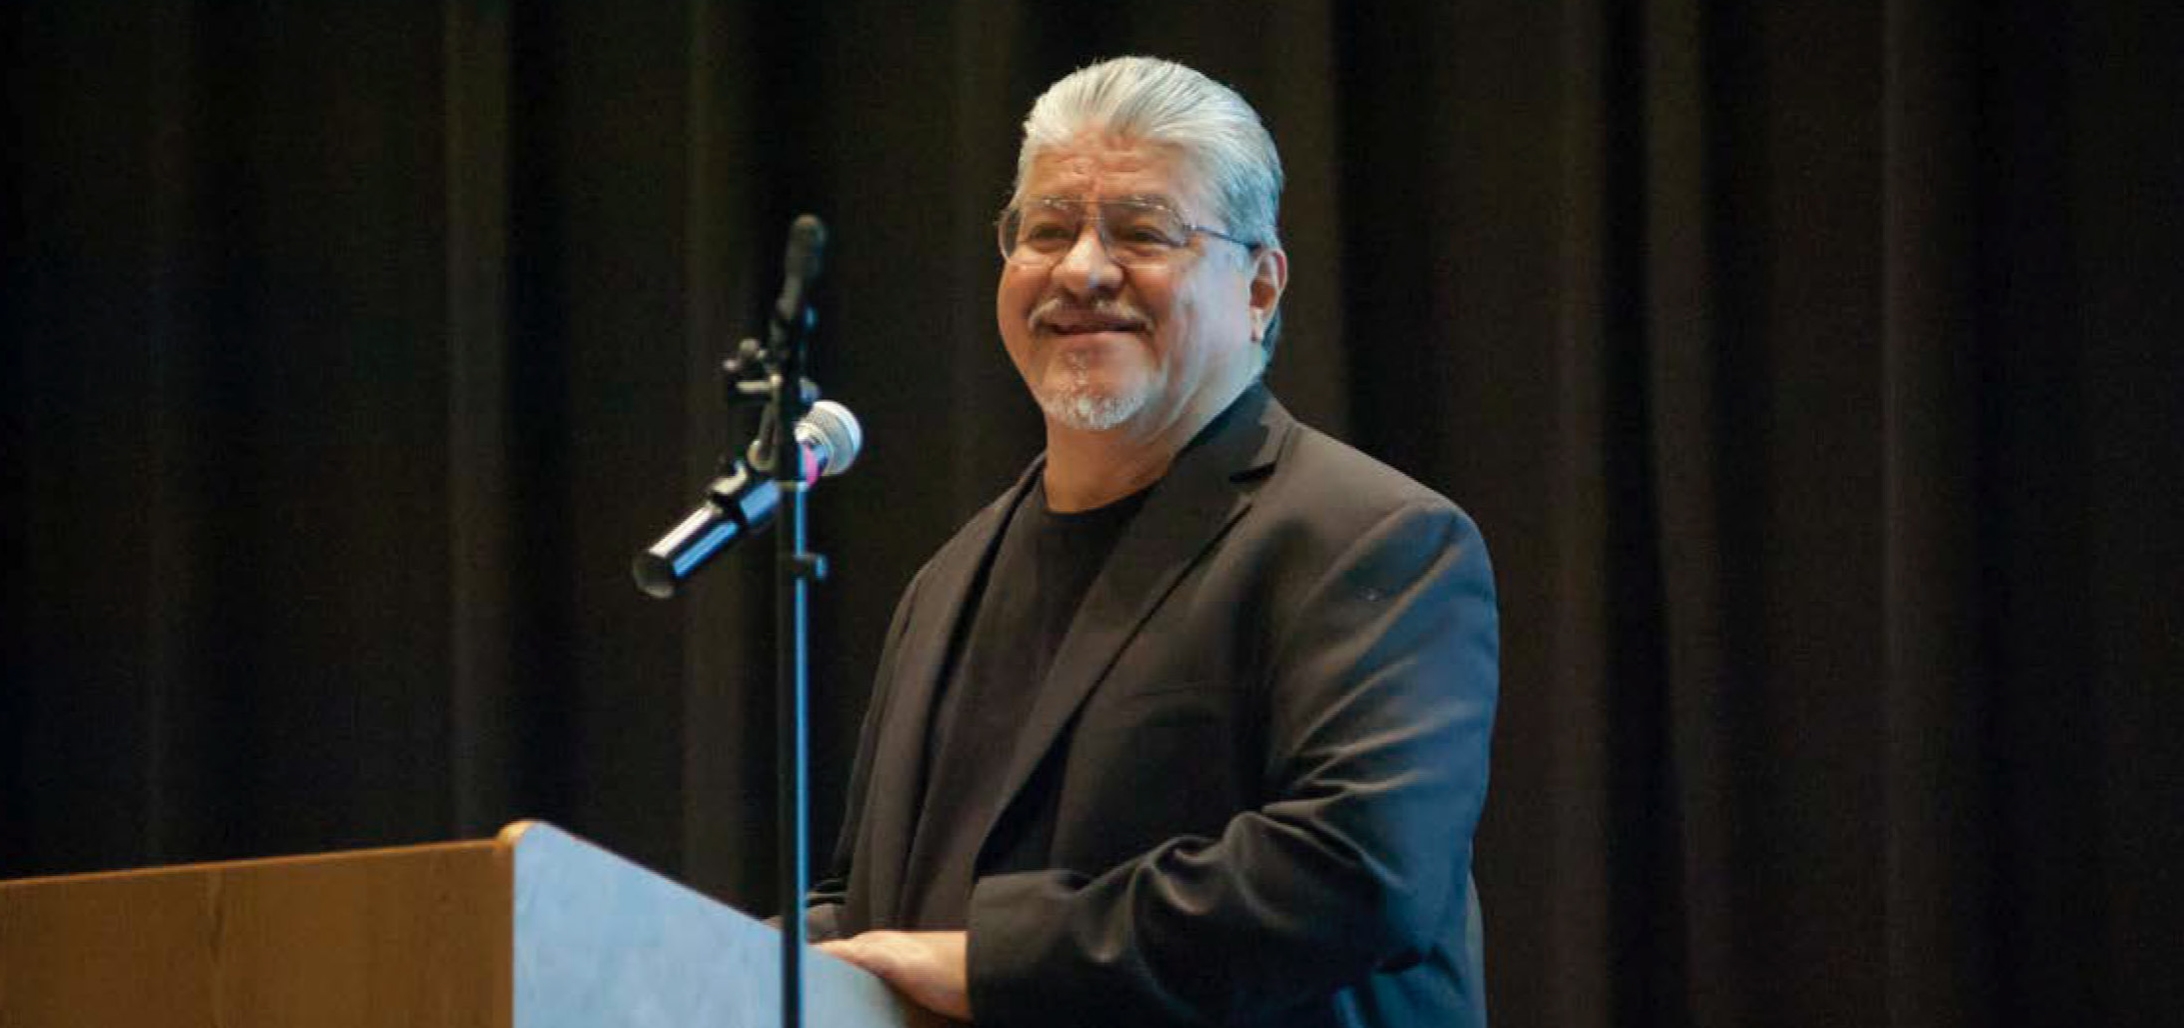 Luis J. Rodriguez speaks to CSUN students, faculty and staff at a May 2015 event honoring his appointment as Los Angeles Poet Laureate. PHOTO BY DAVID J. HAWKINS